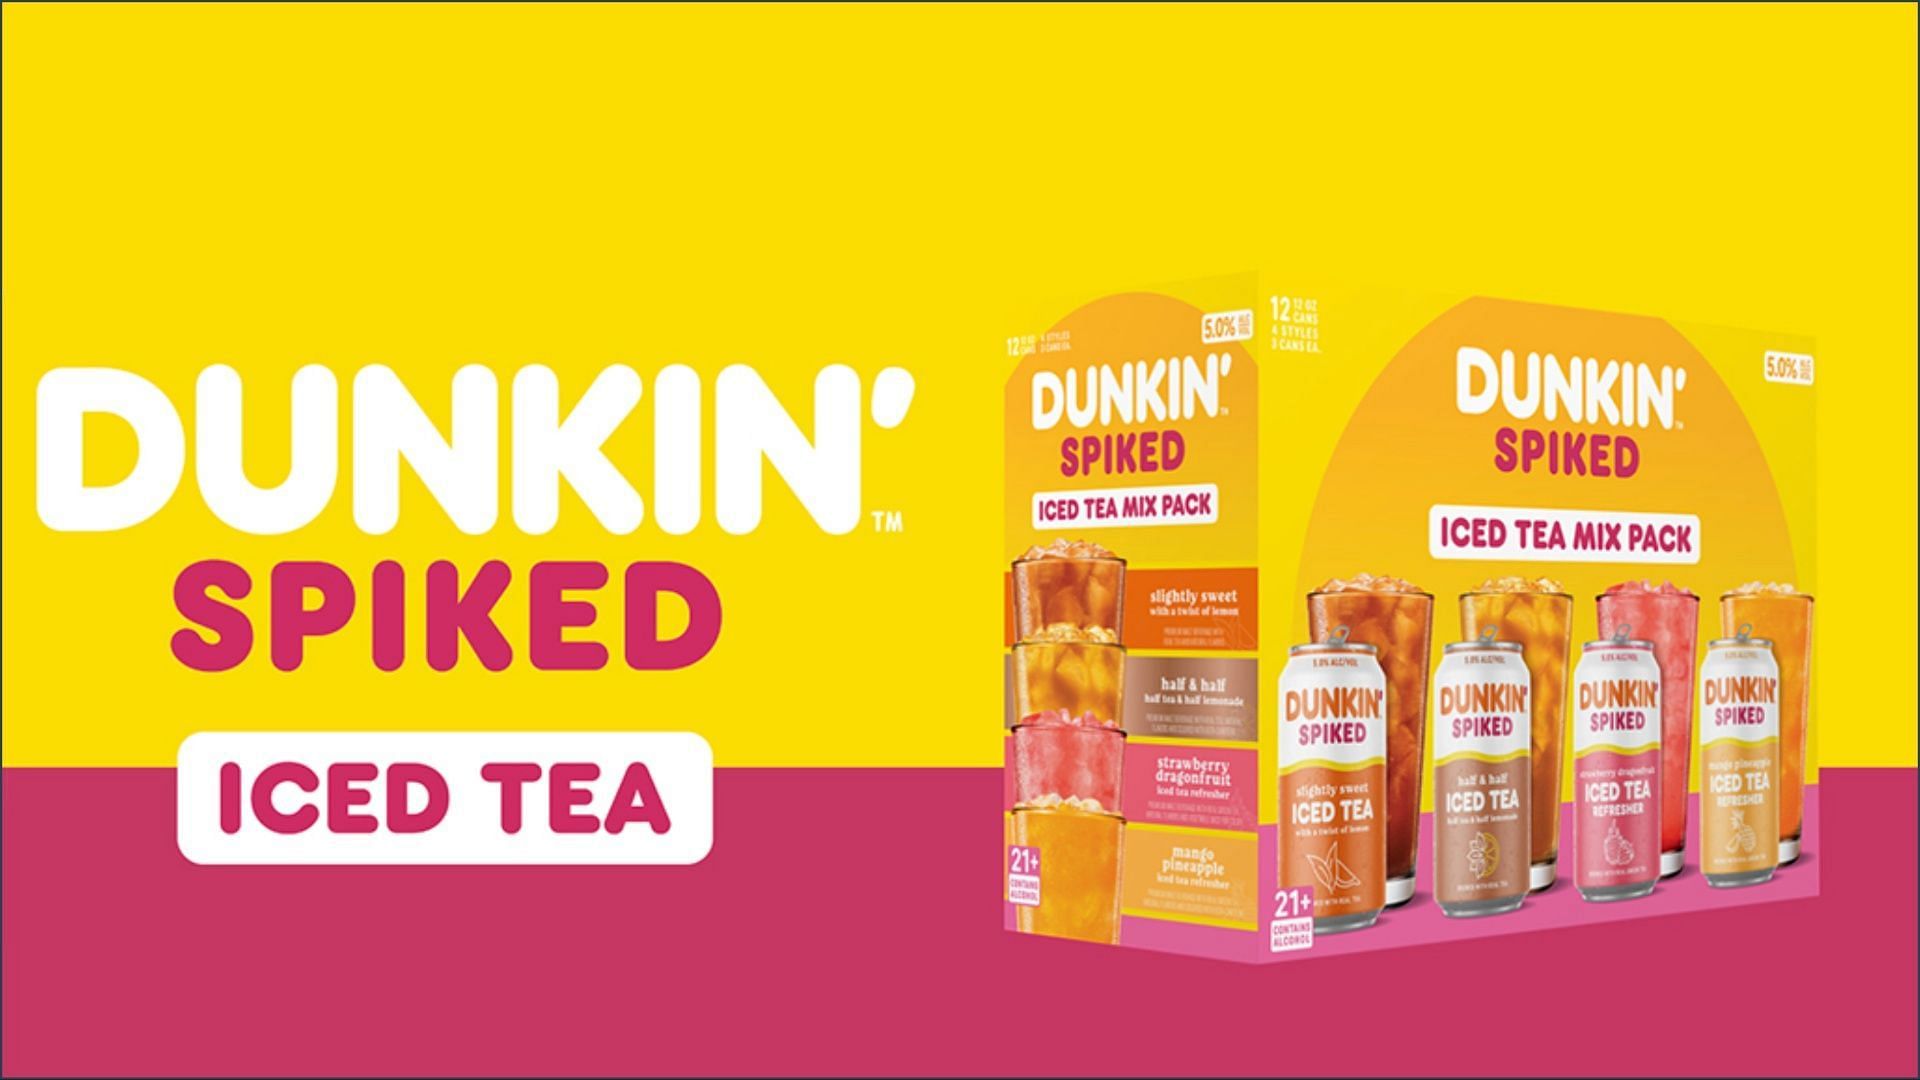 Dunkin Donuts unveils a new Spiked Coffee and Tea line-up (Image via Dunkin